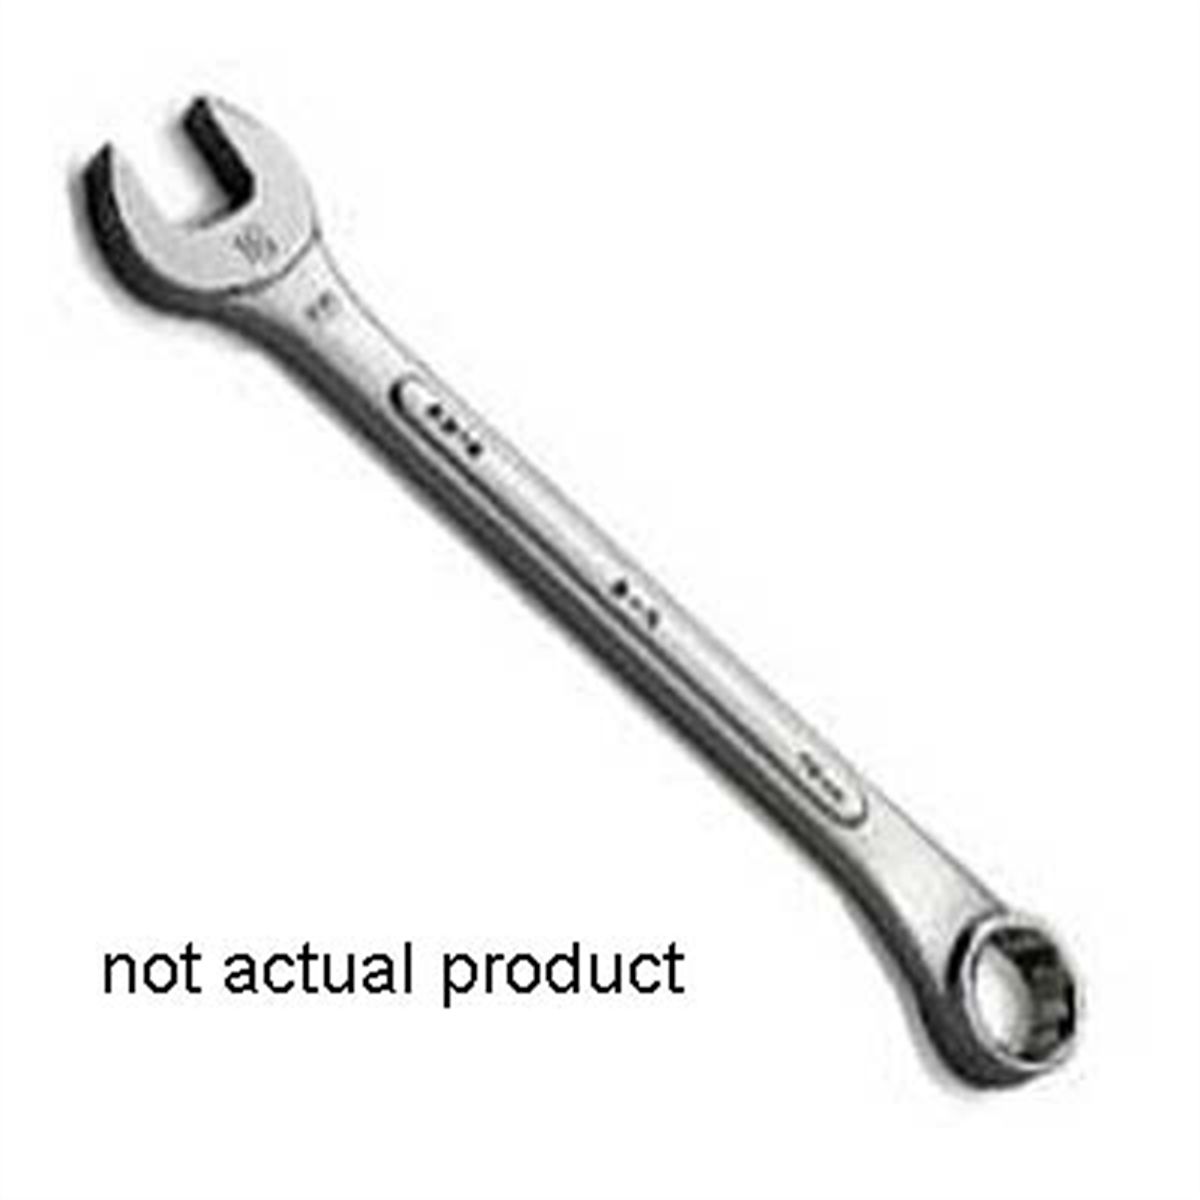 12 Pt Metric Professional Combination Wrench - 26m